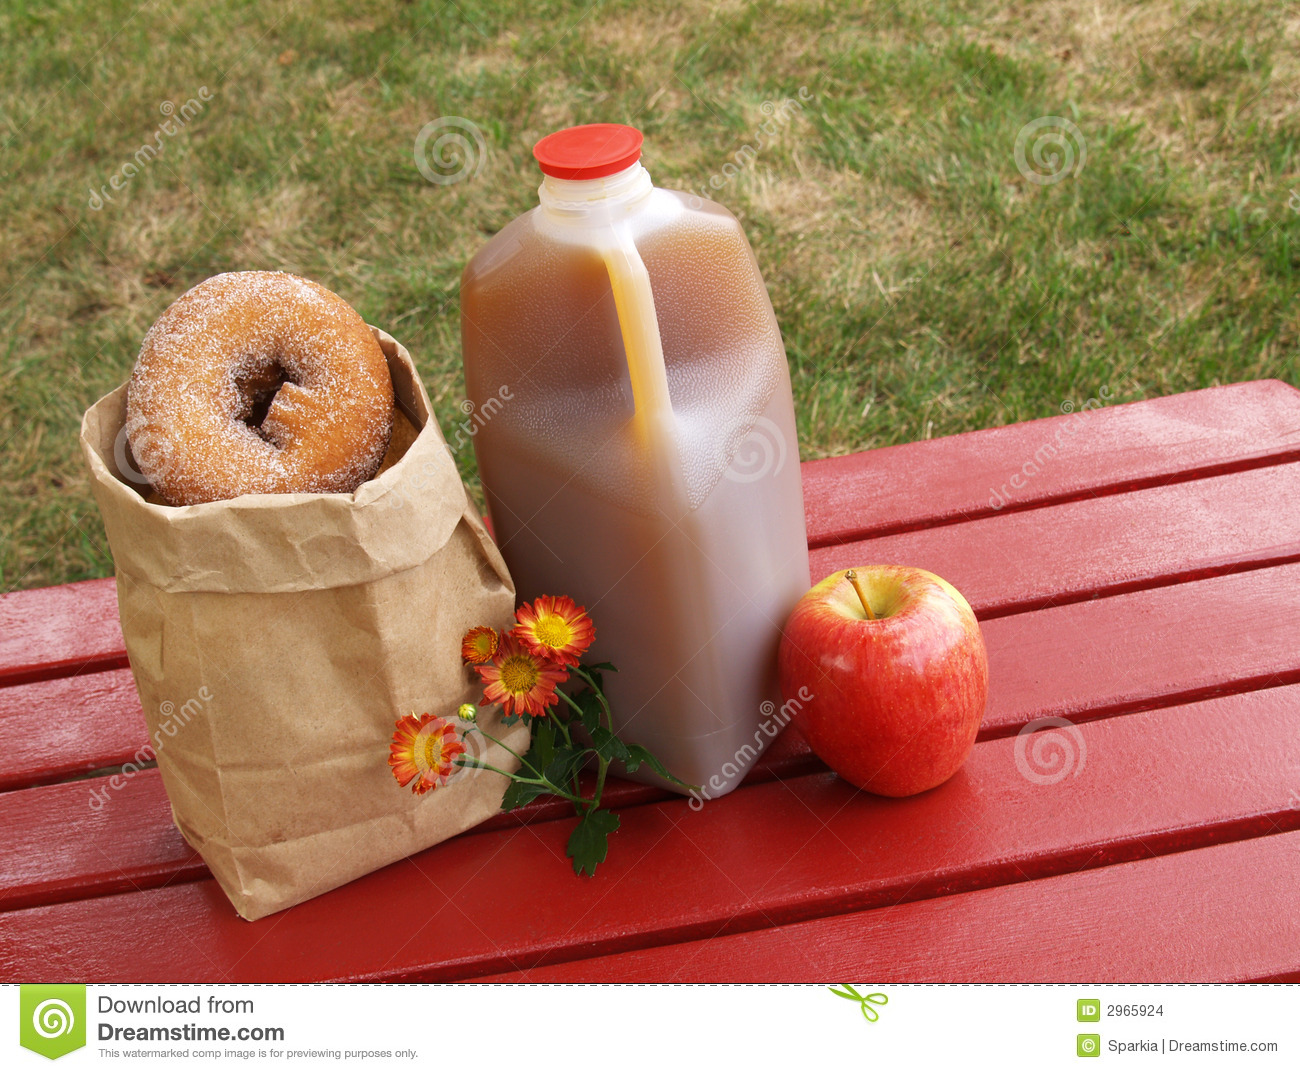 Fall Scene   Apple Cider Donuts And An Apple 